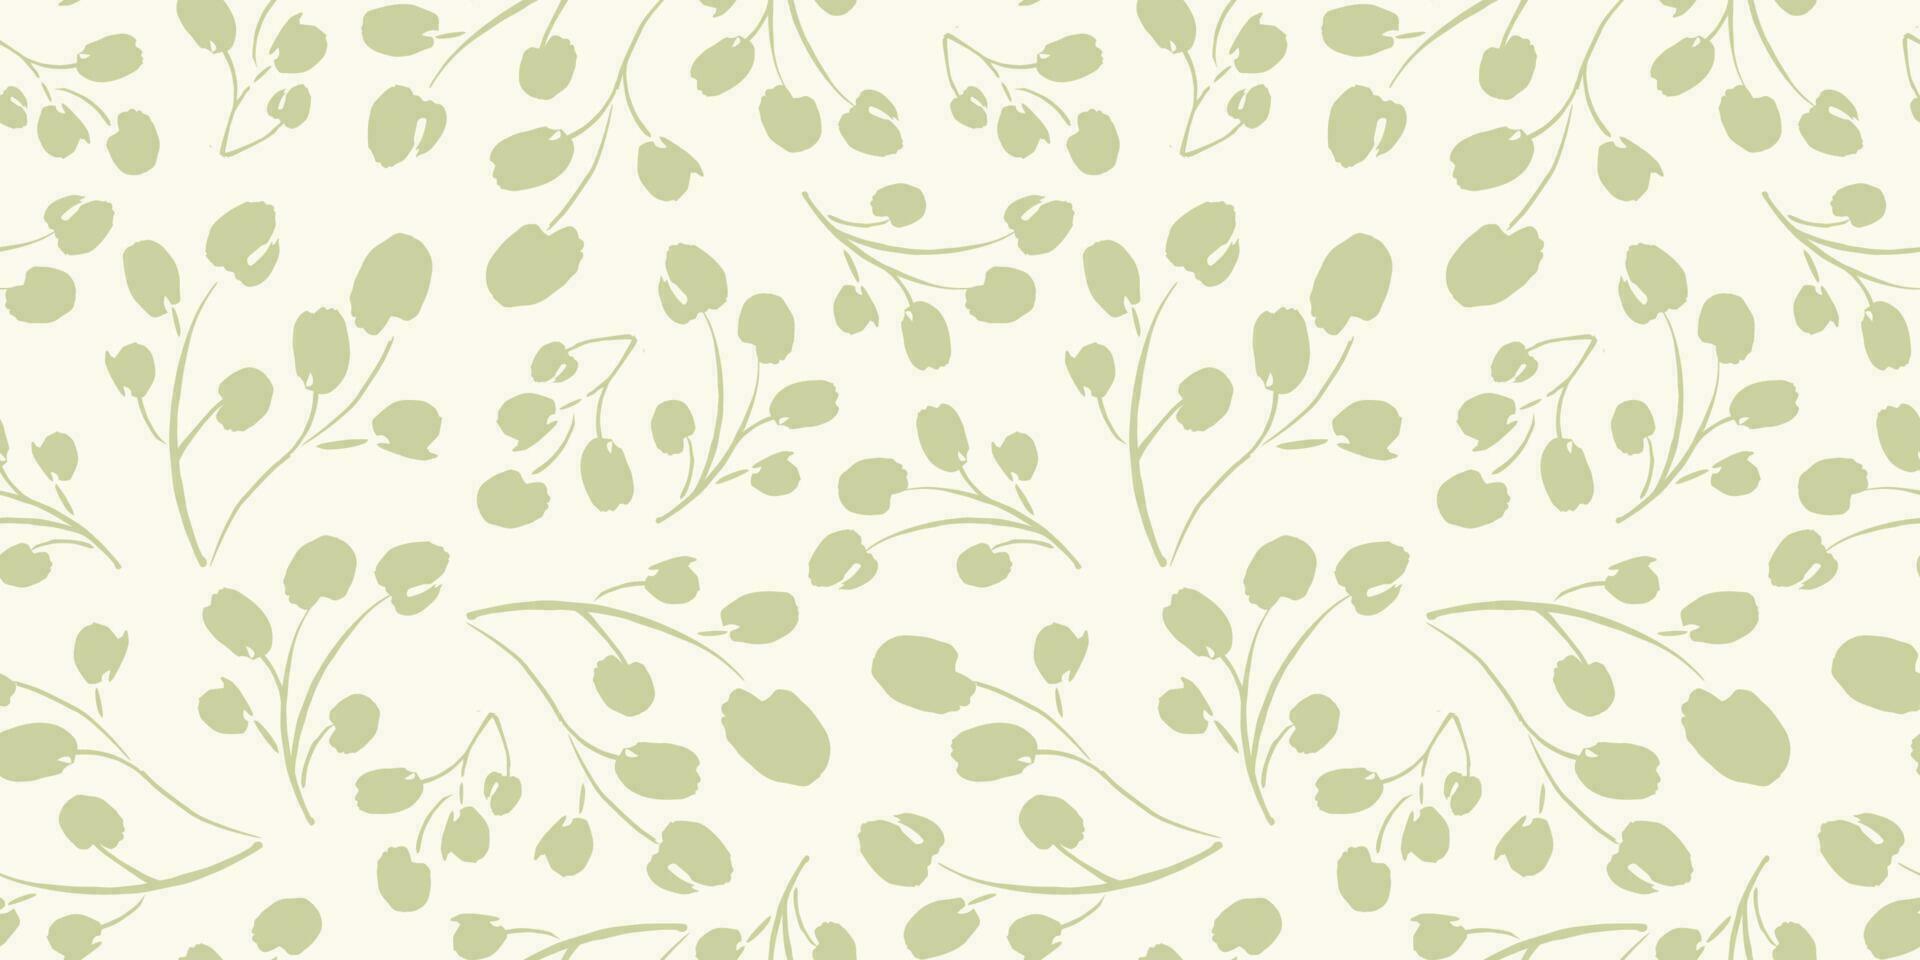 Floral seamless pattern with grass and leaves. Vector design for paper, cover, fabric, interior decor and other use